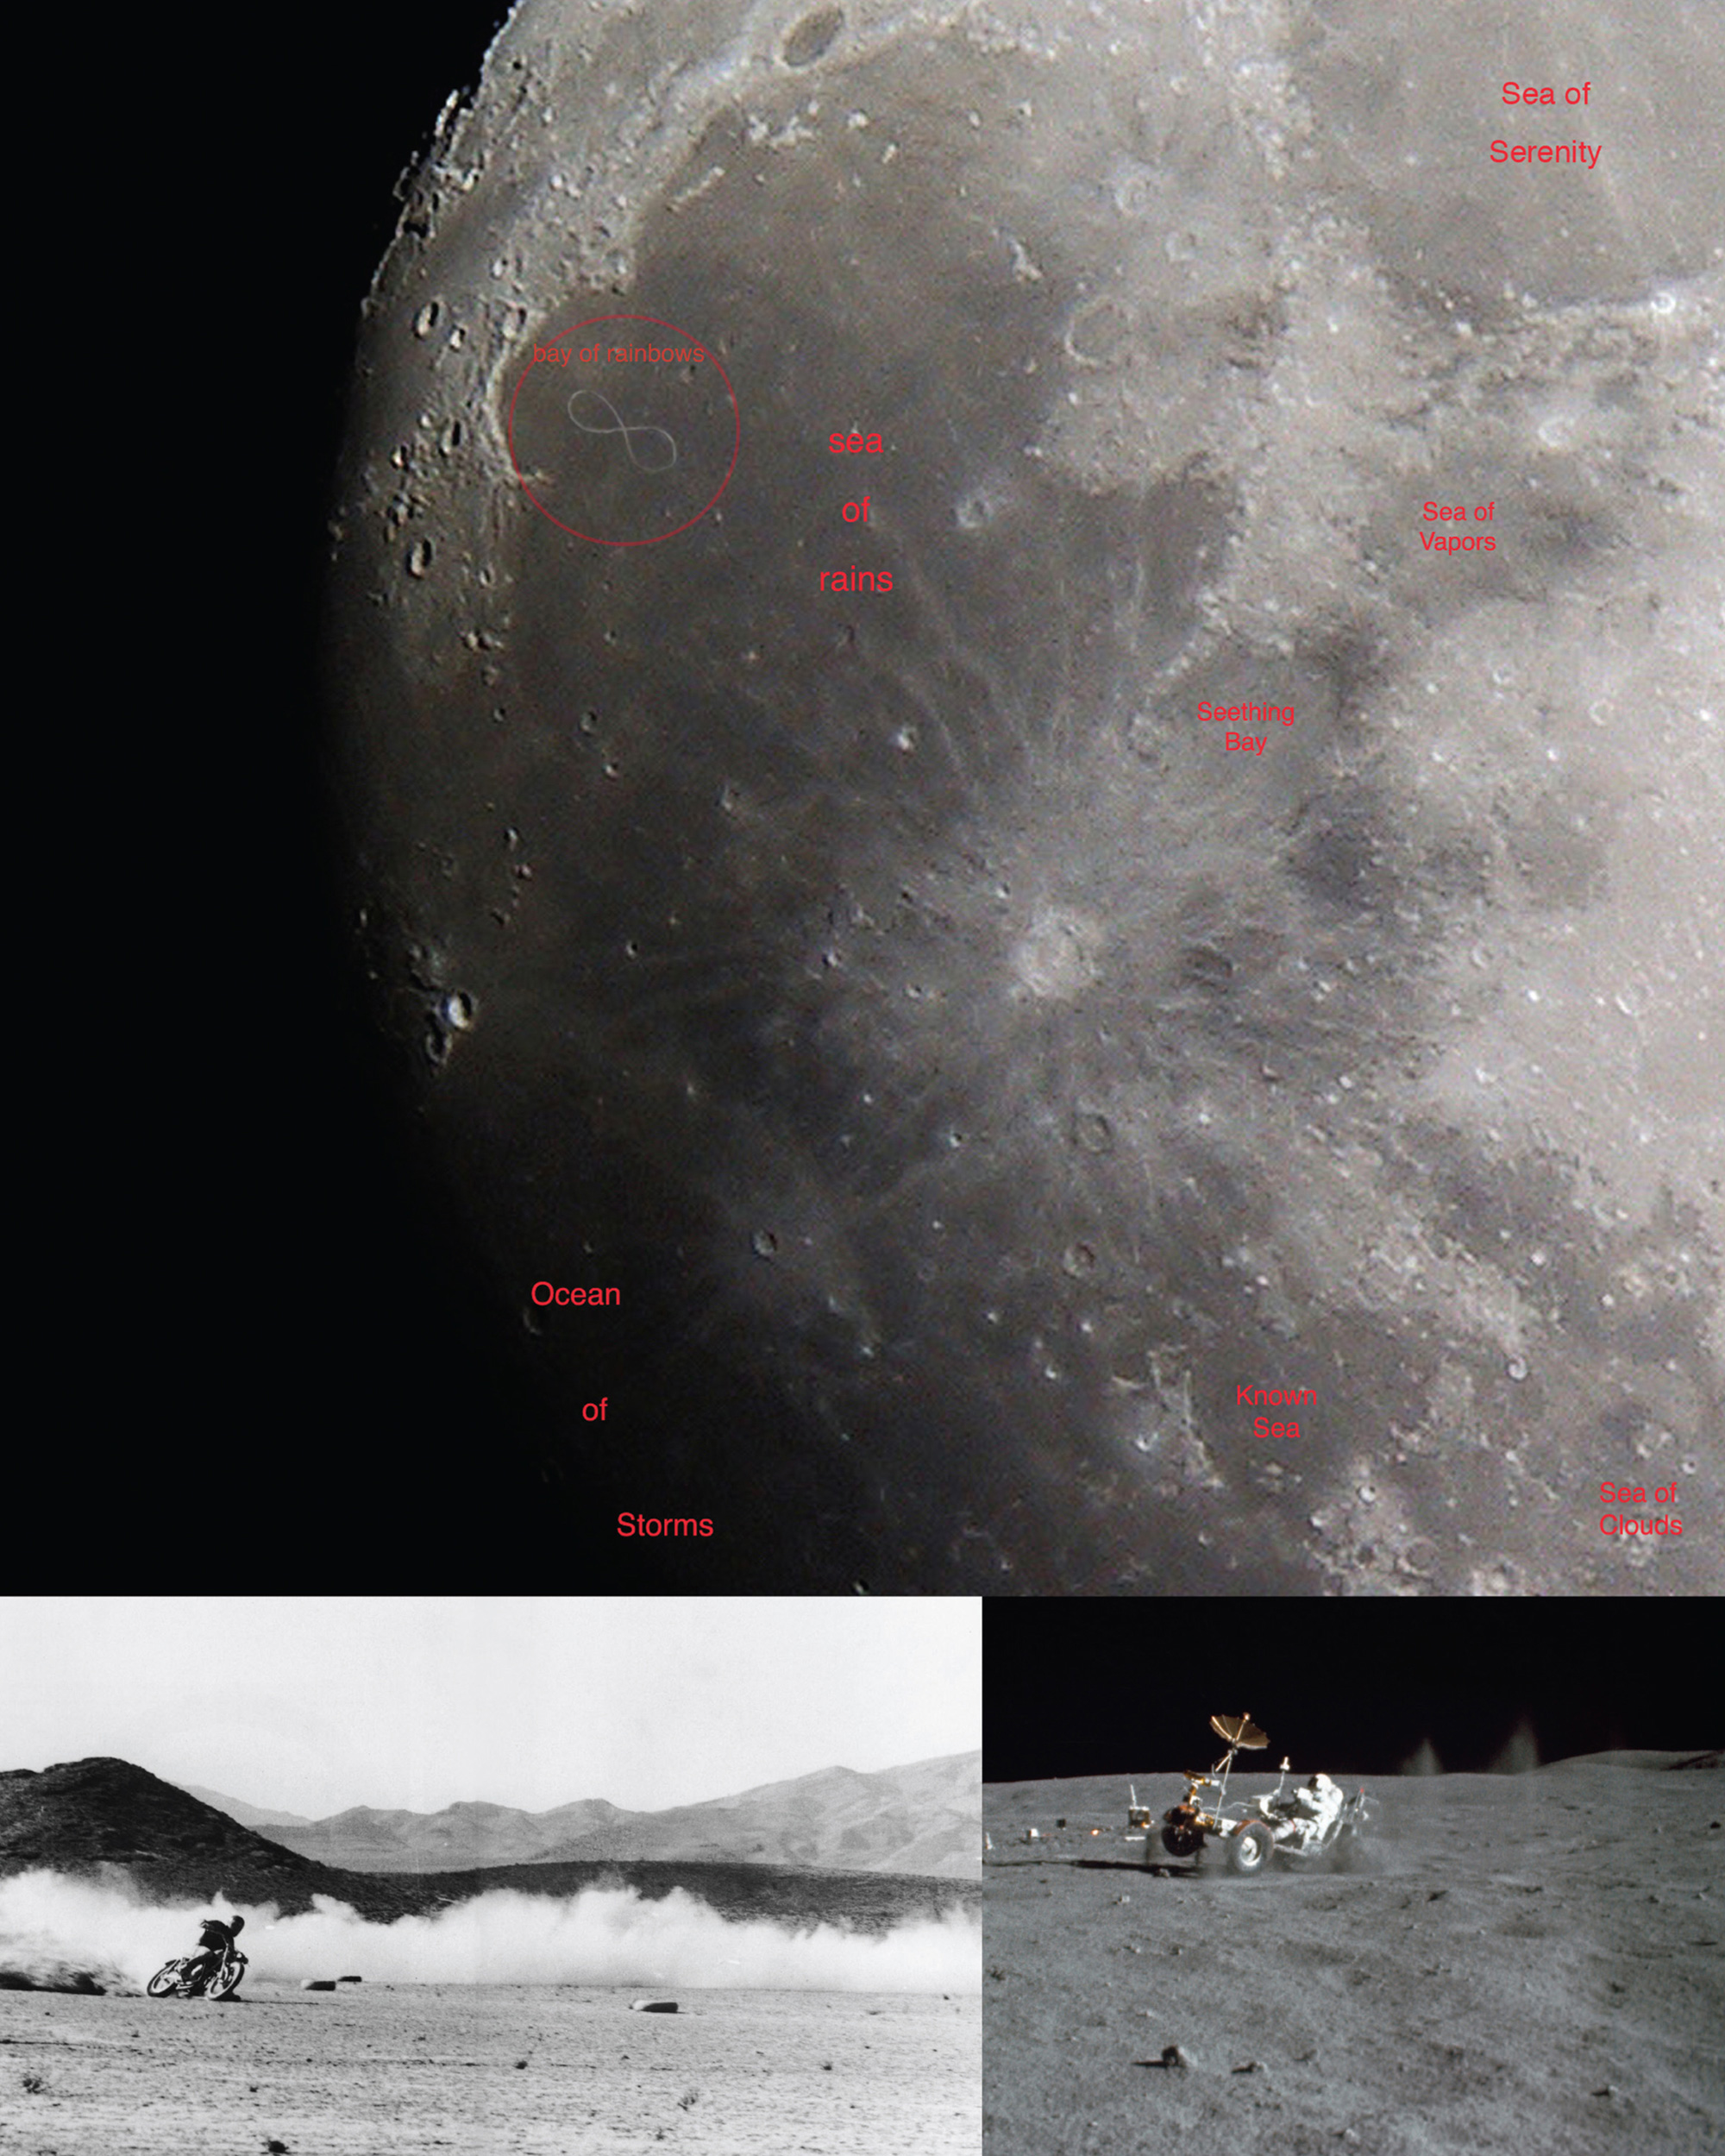 Three images showing the surface of the moon, a motorcycle riding in the dust, and a vehicle driven by an astronaut on the moon.